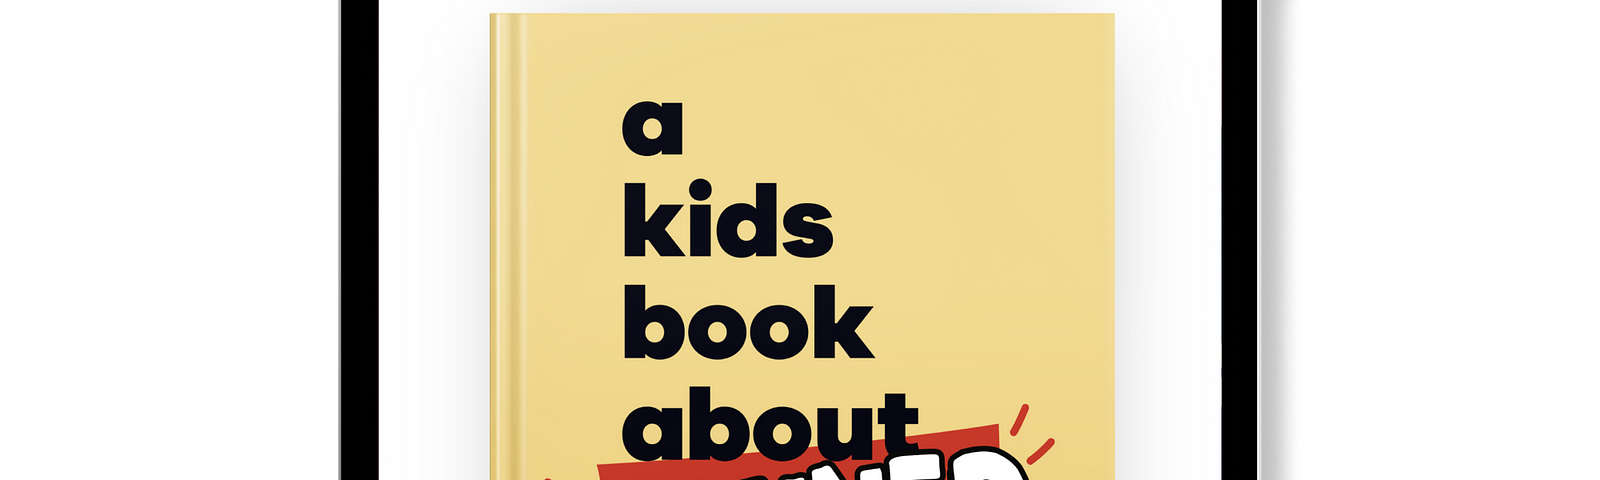 A Kids Book About Banned Books on an iPad mockup.